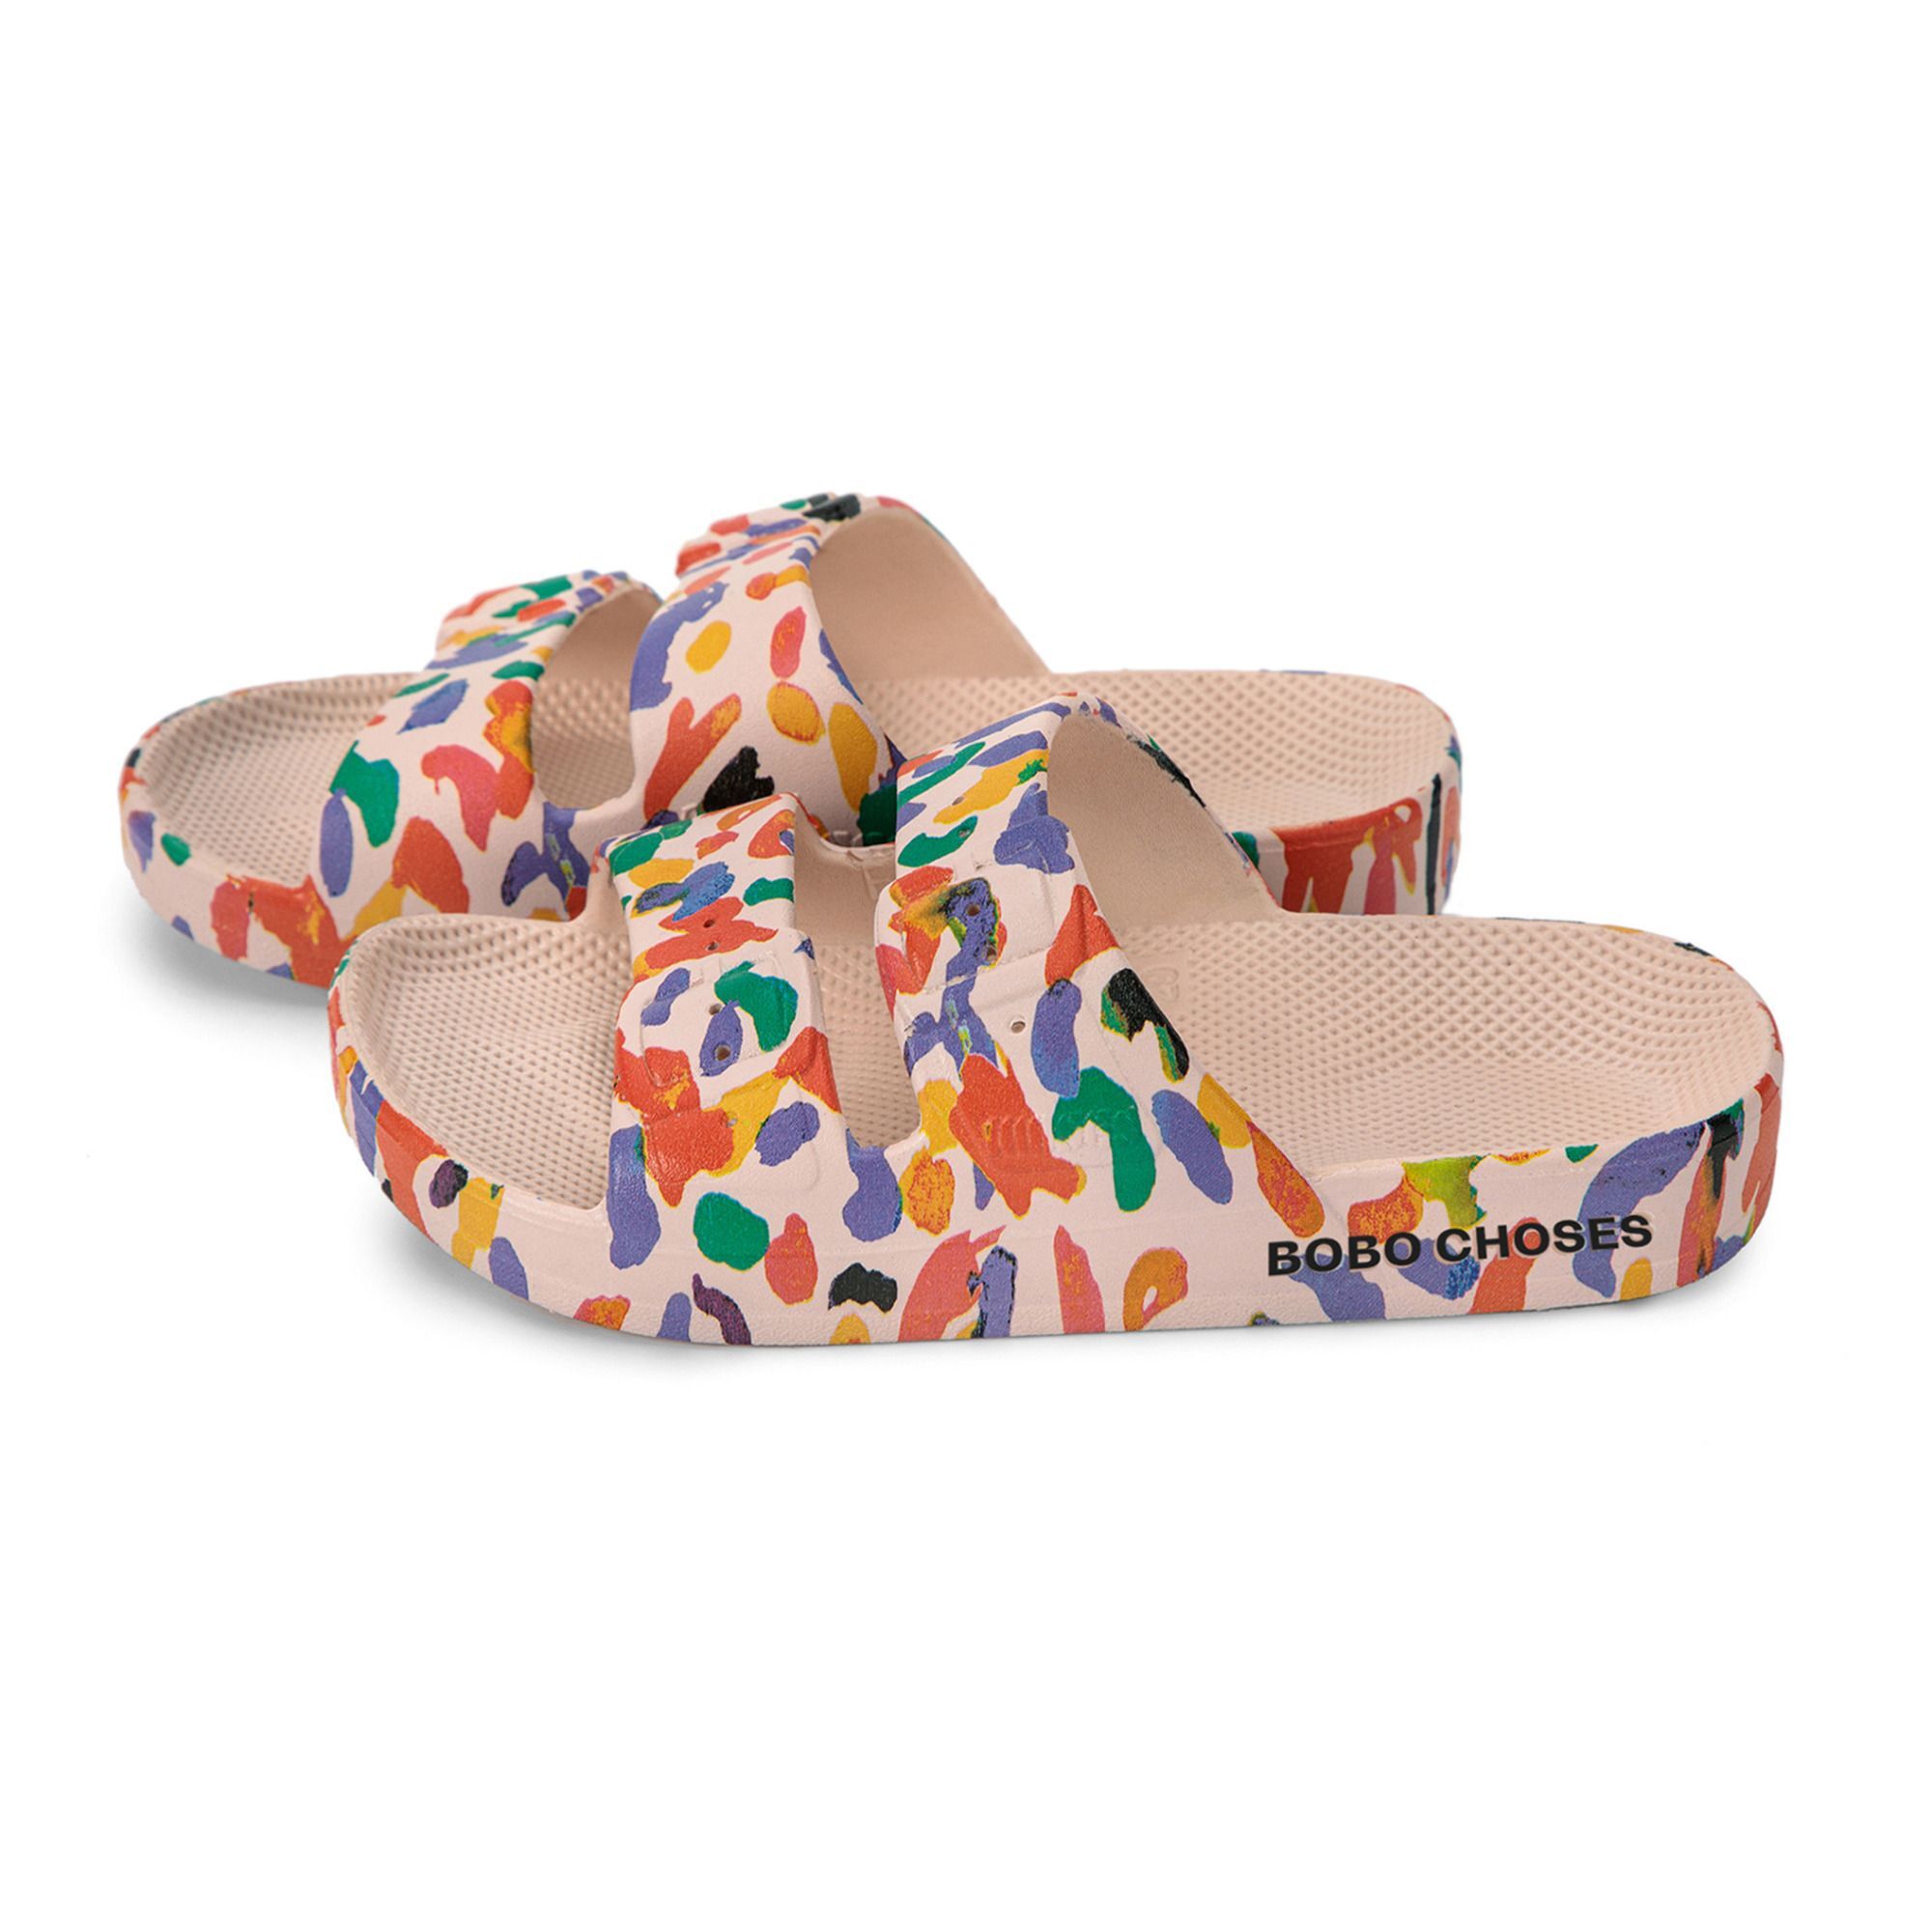 Freedom Moses x Bobo Choses - Confetti Sandals Pink 26/27 Girl